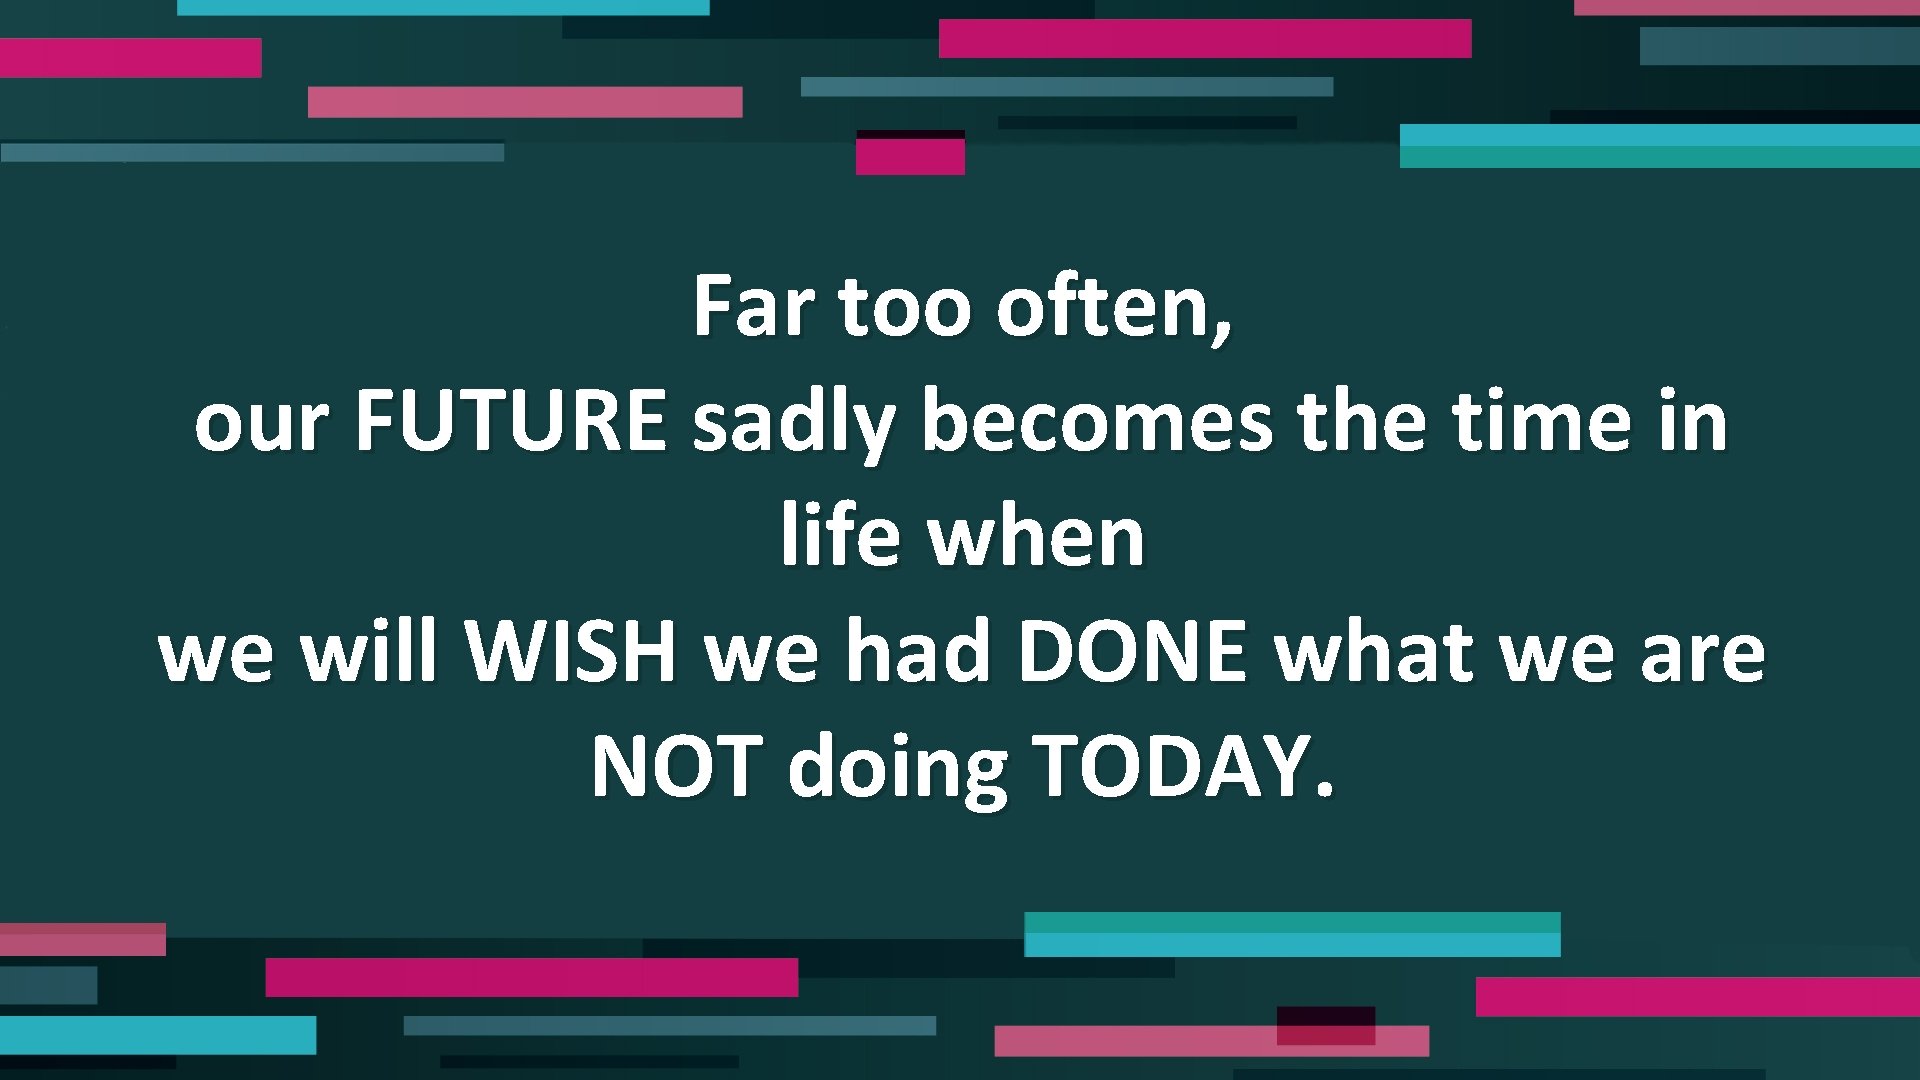 Far too often, our FUTURE sadly becomes the time in life when we will